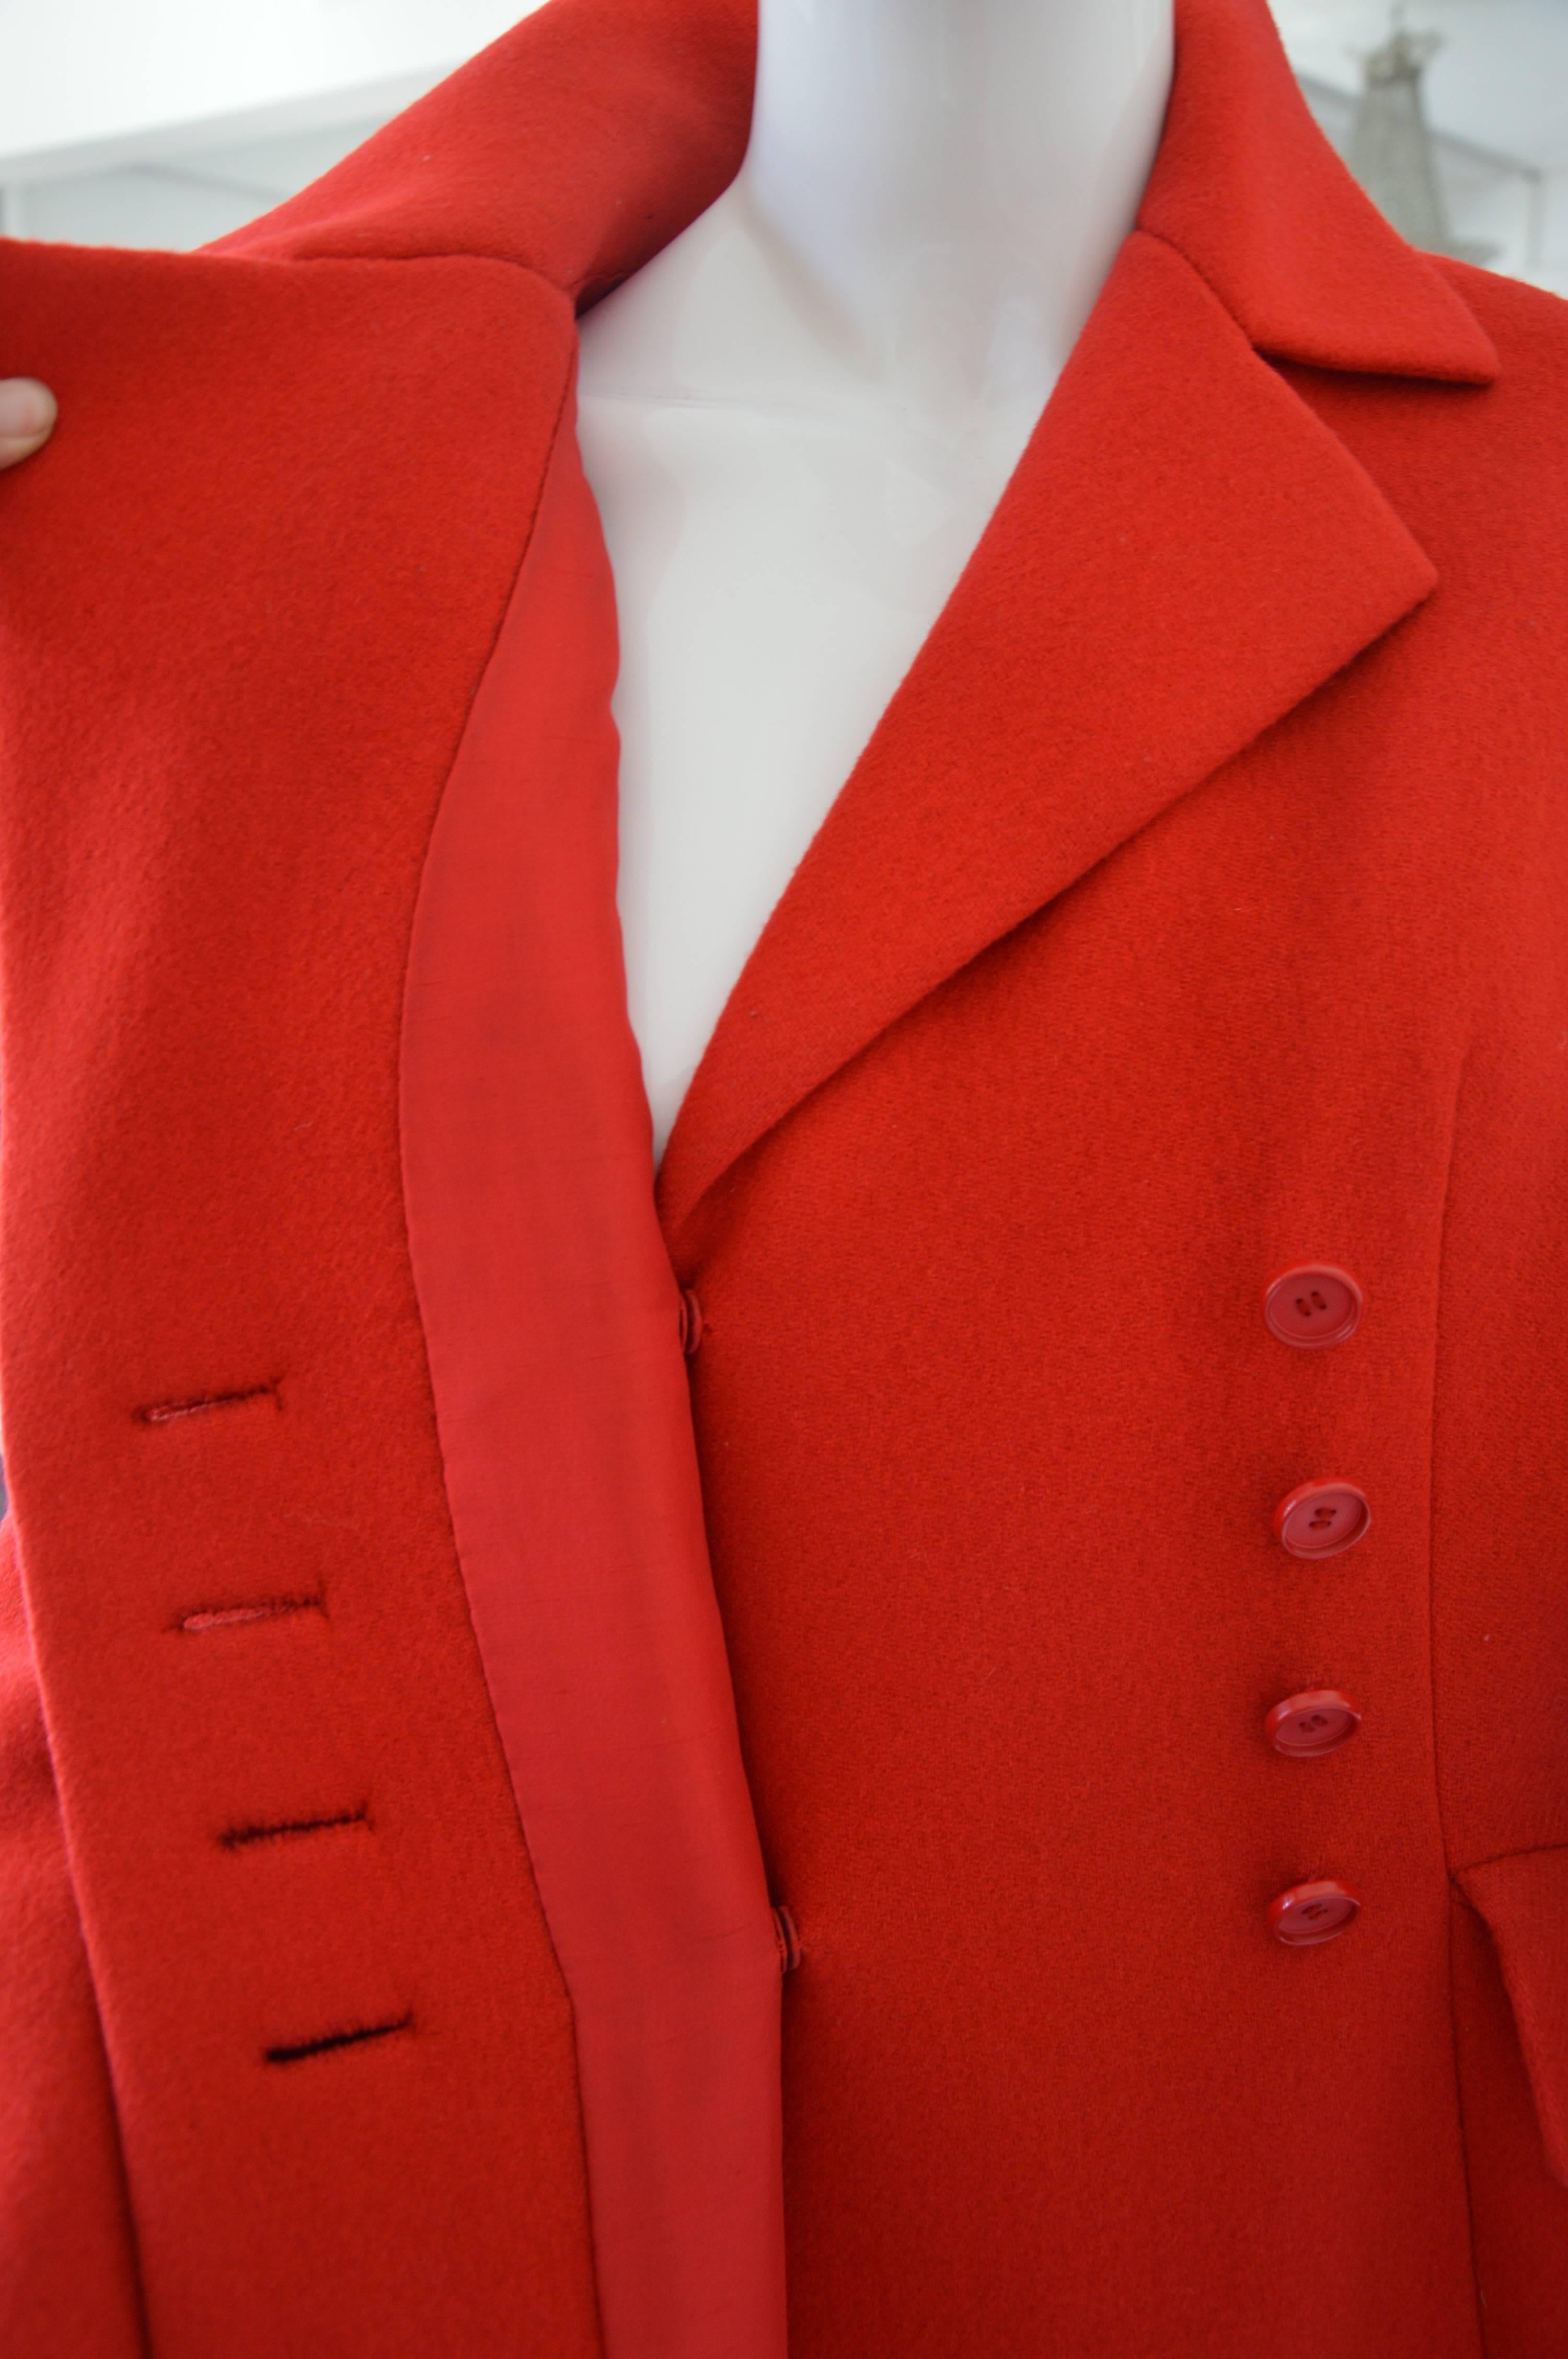 Women's Rare Early 1970s Christian Dior Couture Hot Red Wool Coat